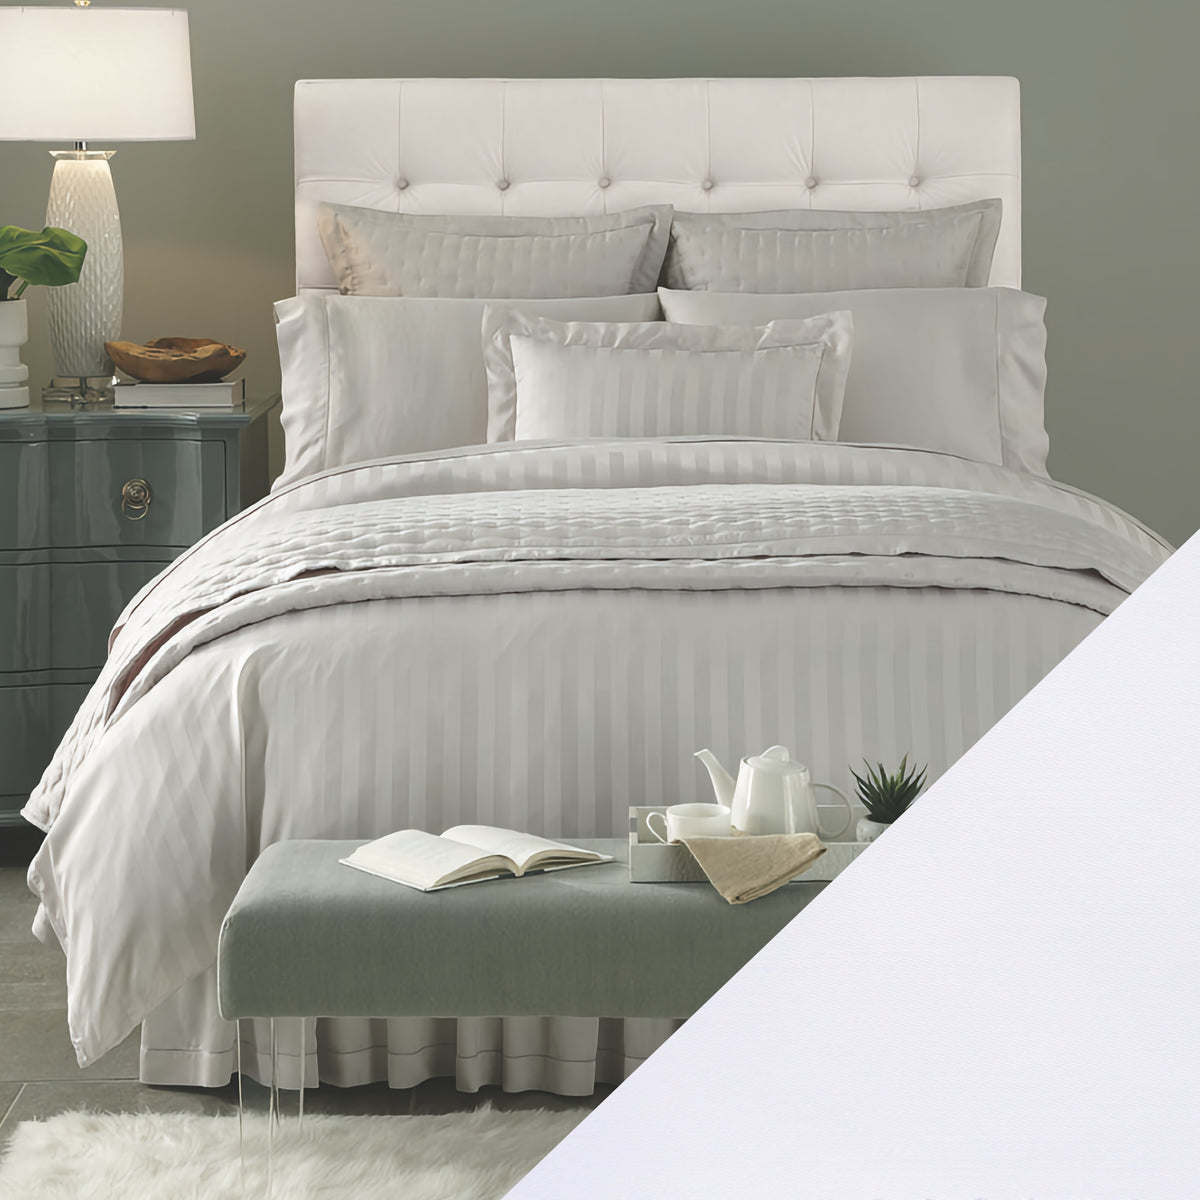 Home Treasures Athens Bedding Lifestyle Solid White Fine Linens